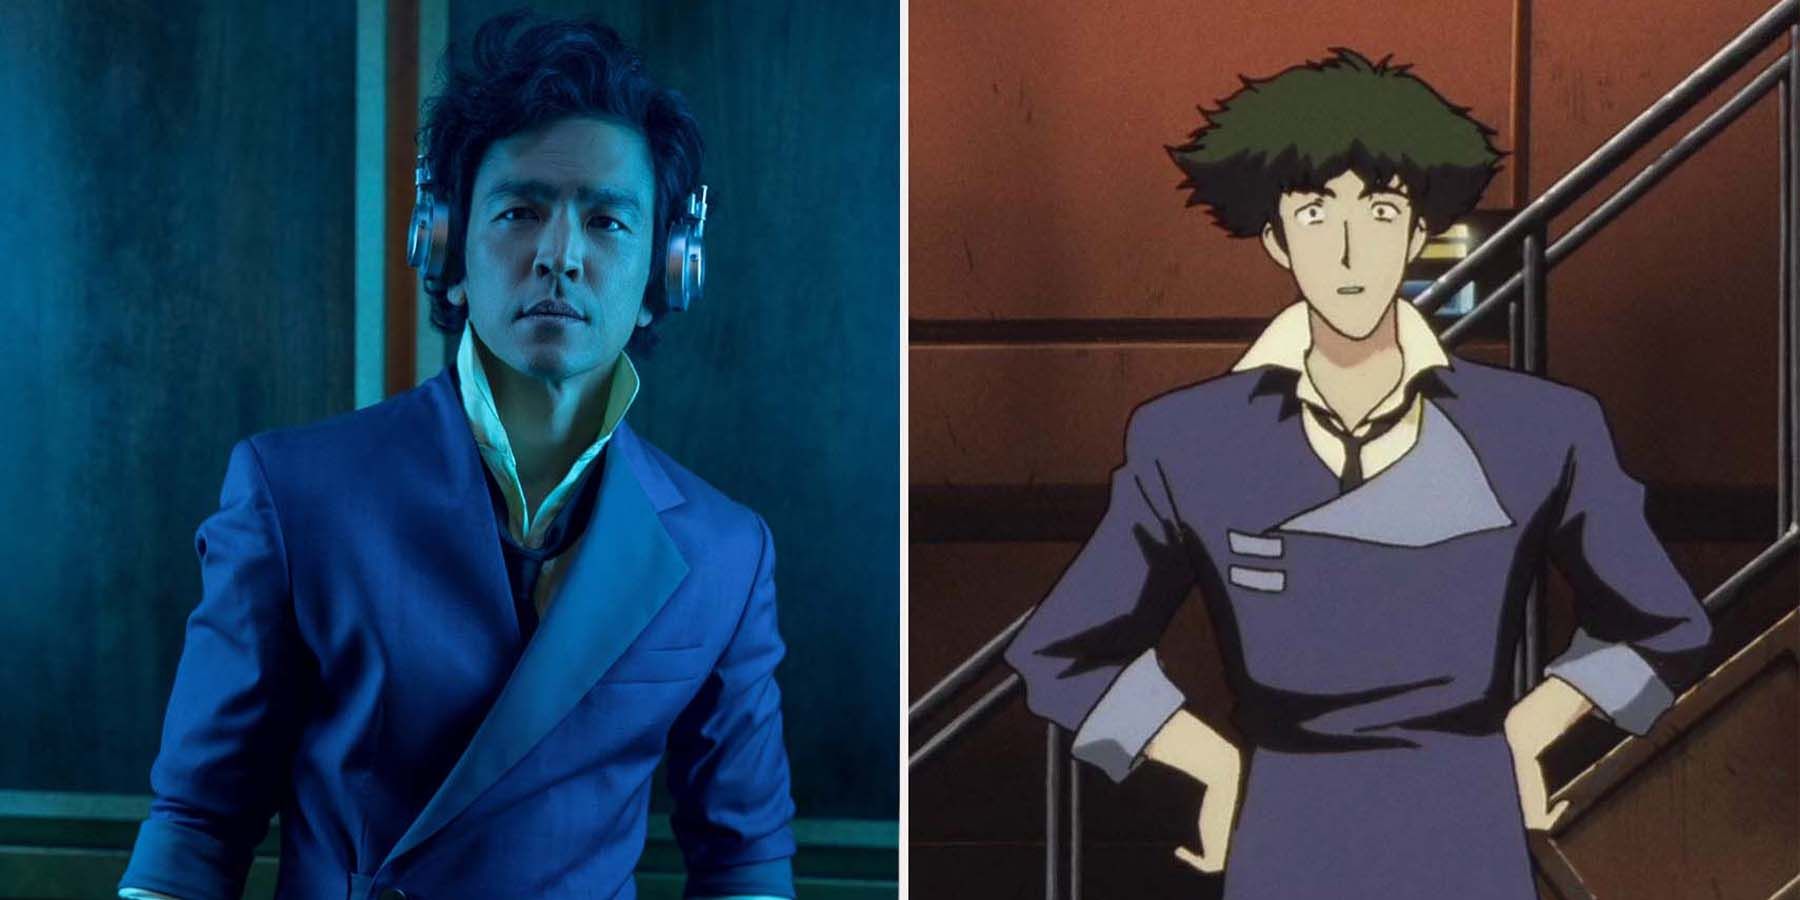 What makes Cowboy Bebop a great anime only after finishing it and not while  watching it? - Quora